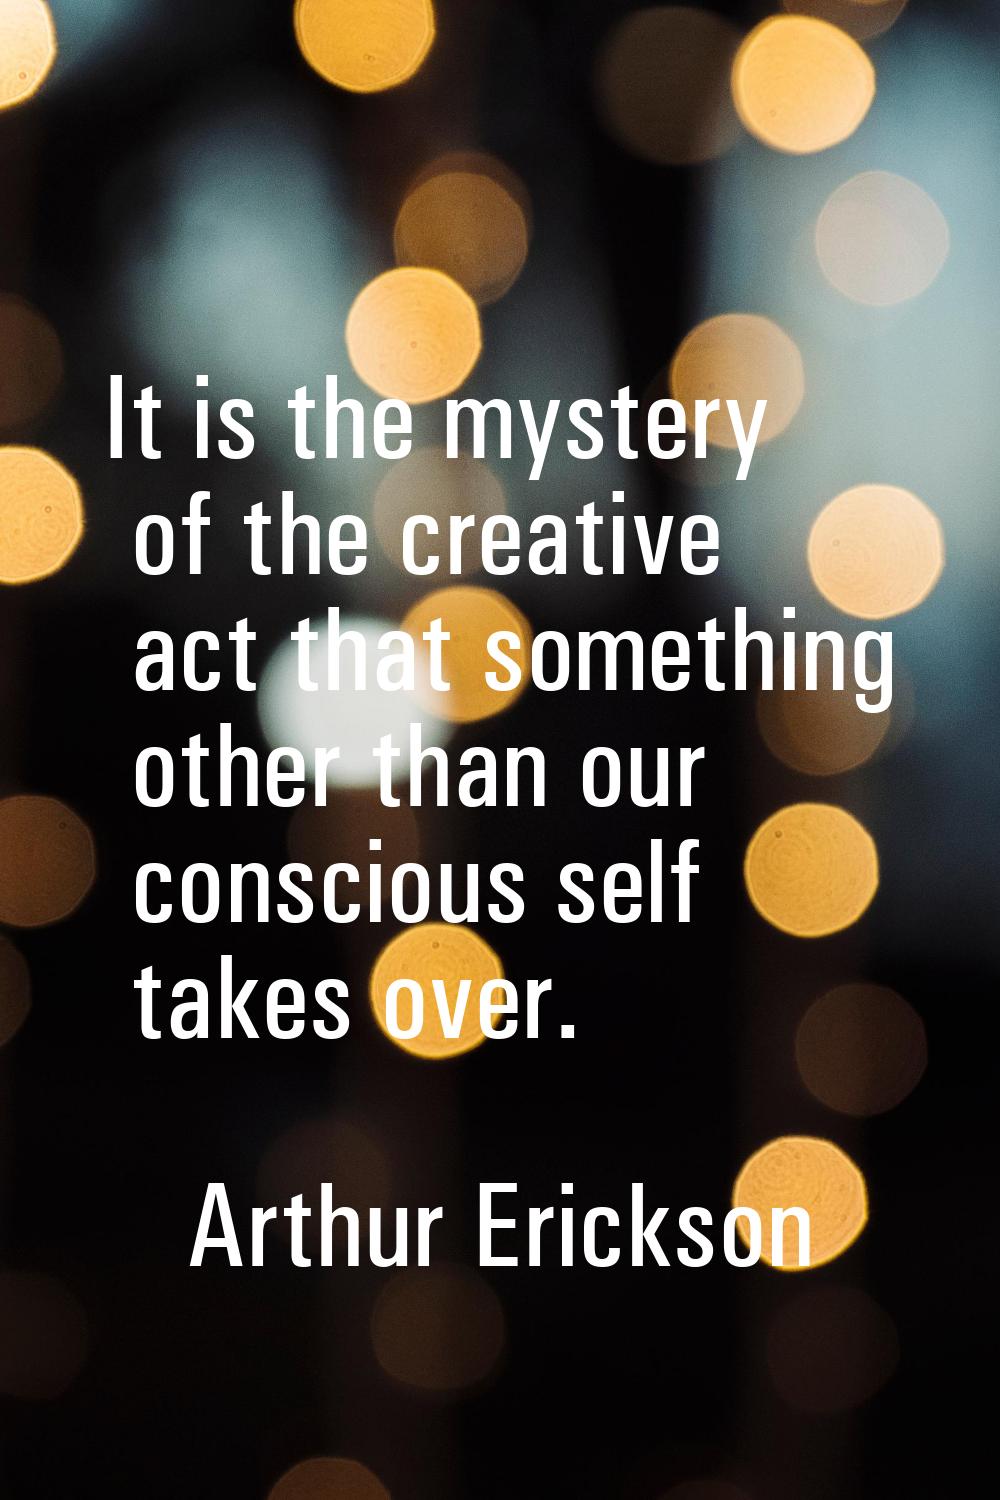 It is the mystery of the creative act that something other than our conscious self takes over.